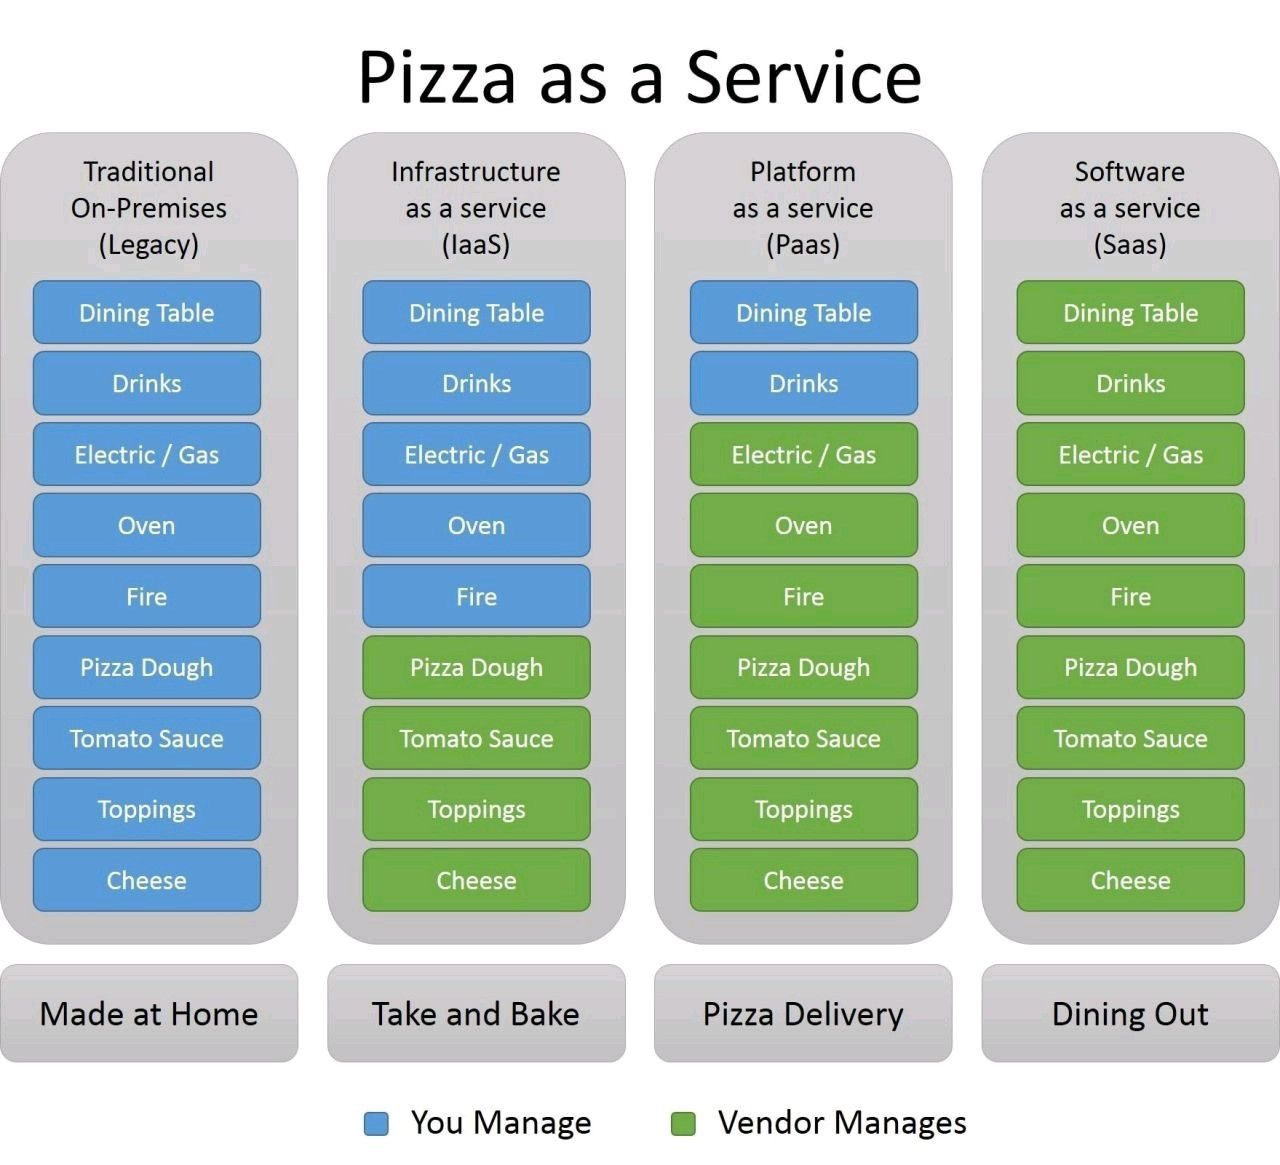 pizza as a service - Pizza as a Service Traditional OnPremises Legacy Infrastructure as a service laas Platform as a service Paas Software as a service Saas Dining Table Dining Table Dining Table Dining Table Drinks Drinks Drinks Drinks Electric Gas Elect